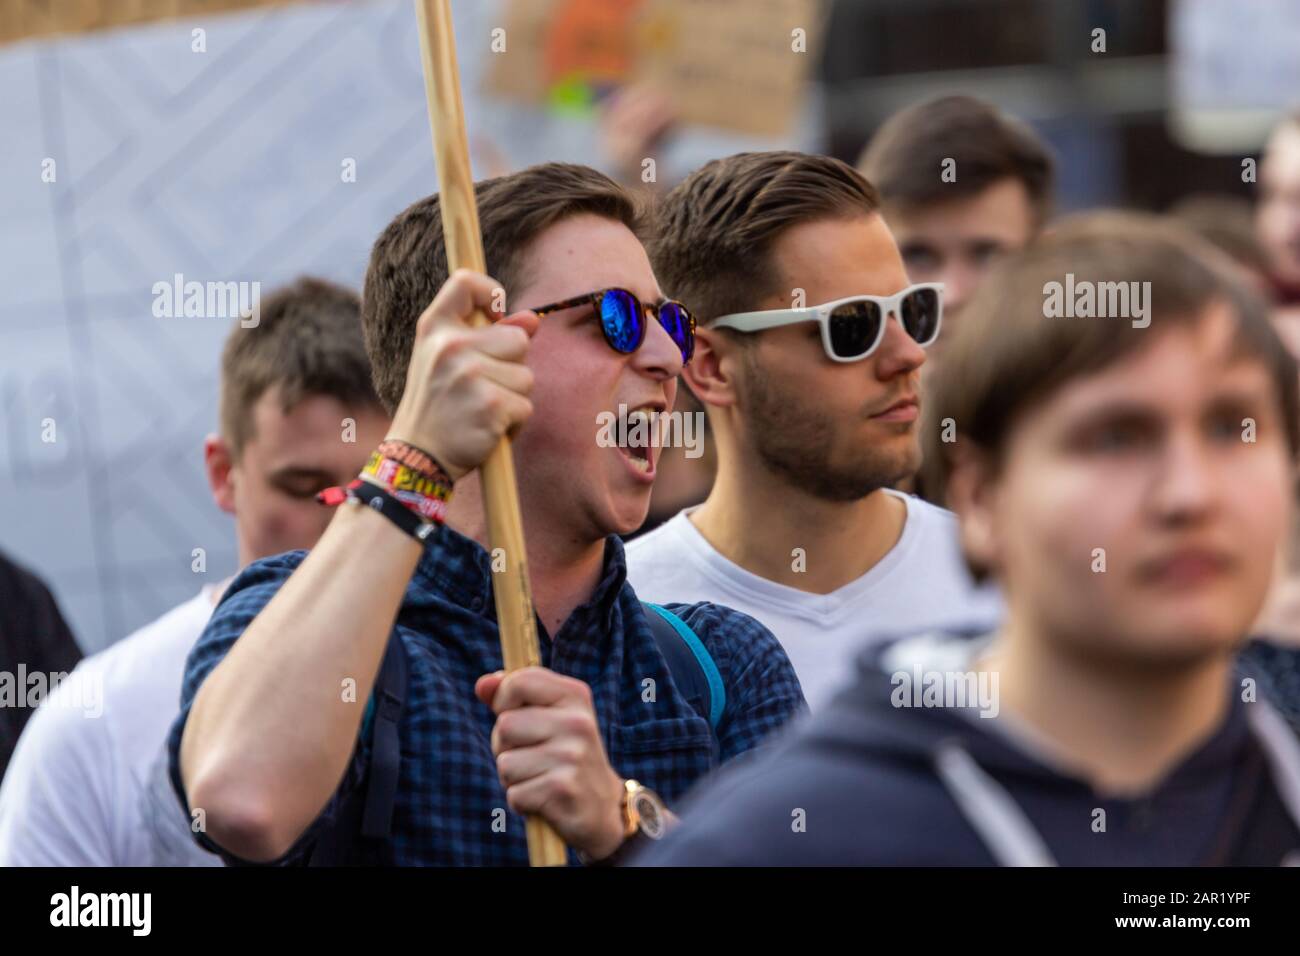 ERFURT, GERMANY - Mar 23, 2019: Young teenager man isolated shouting and holding sign at protest rally against new copyright law by European union, na Stock Photo